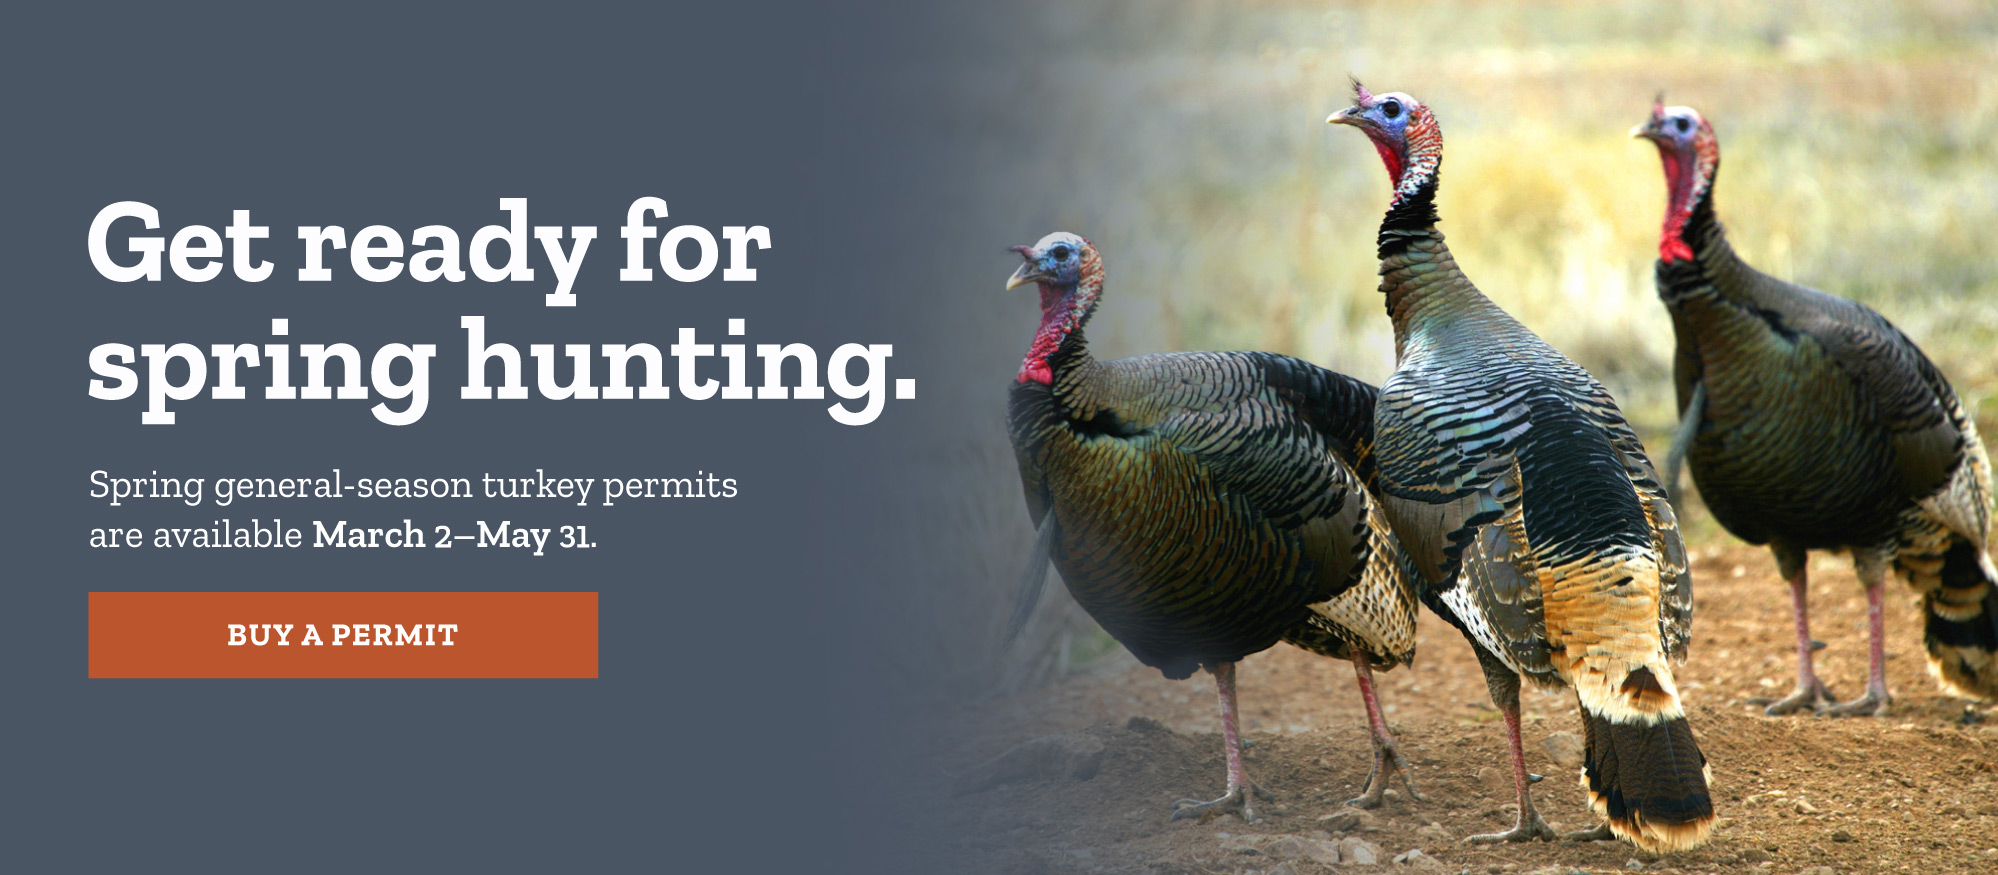 Get ready for spring hunting.